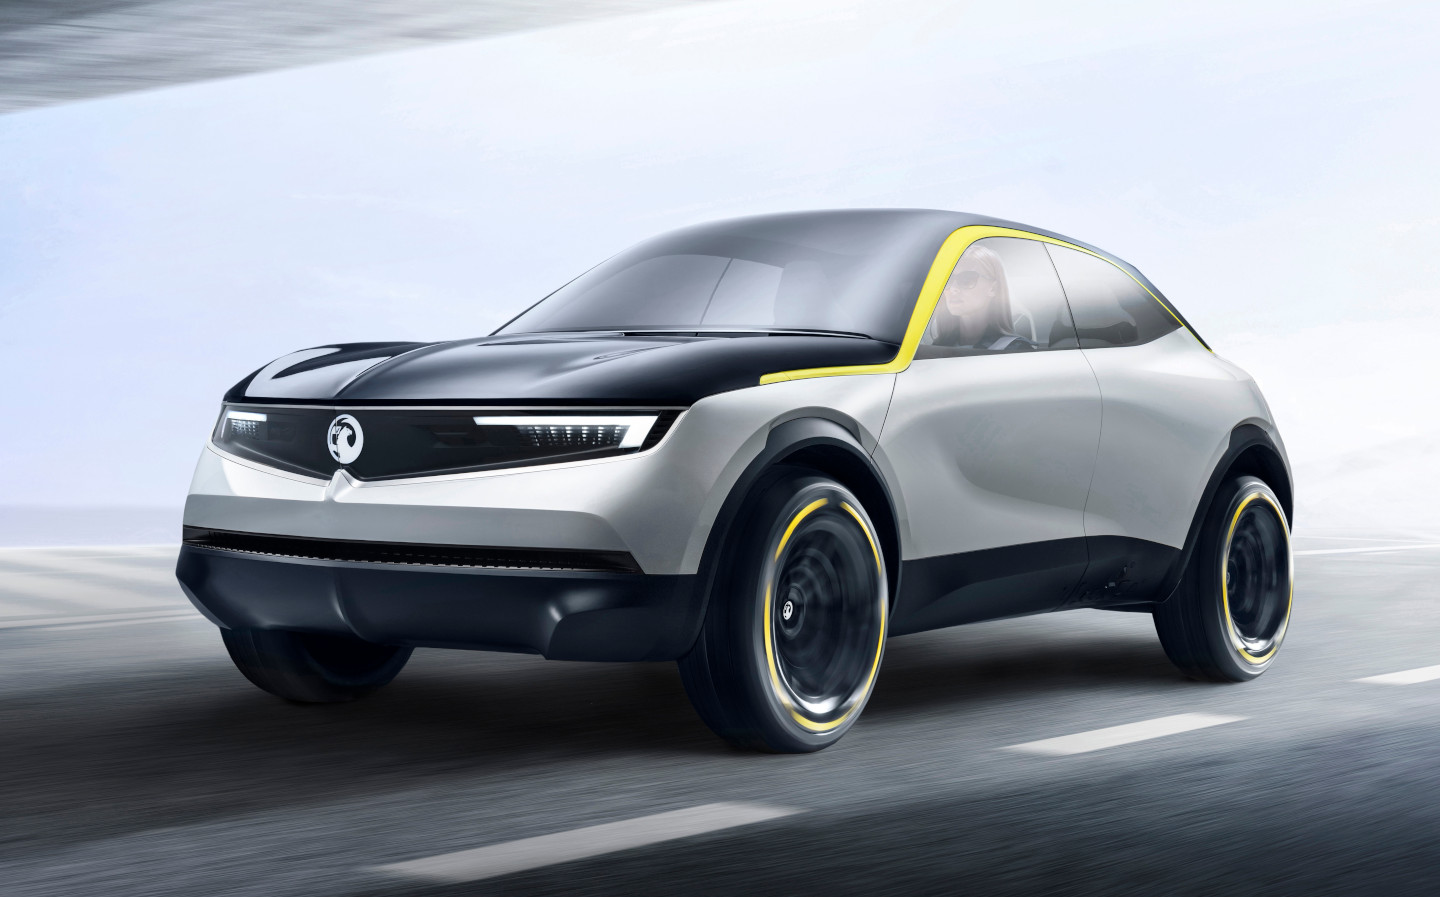 The Vauxhall GT X concept